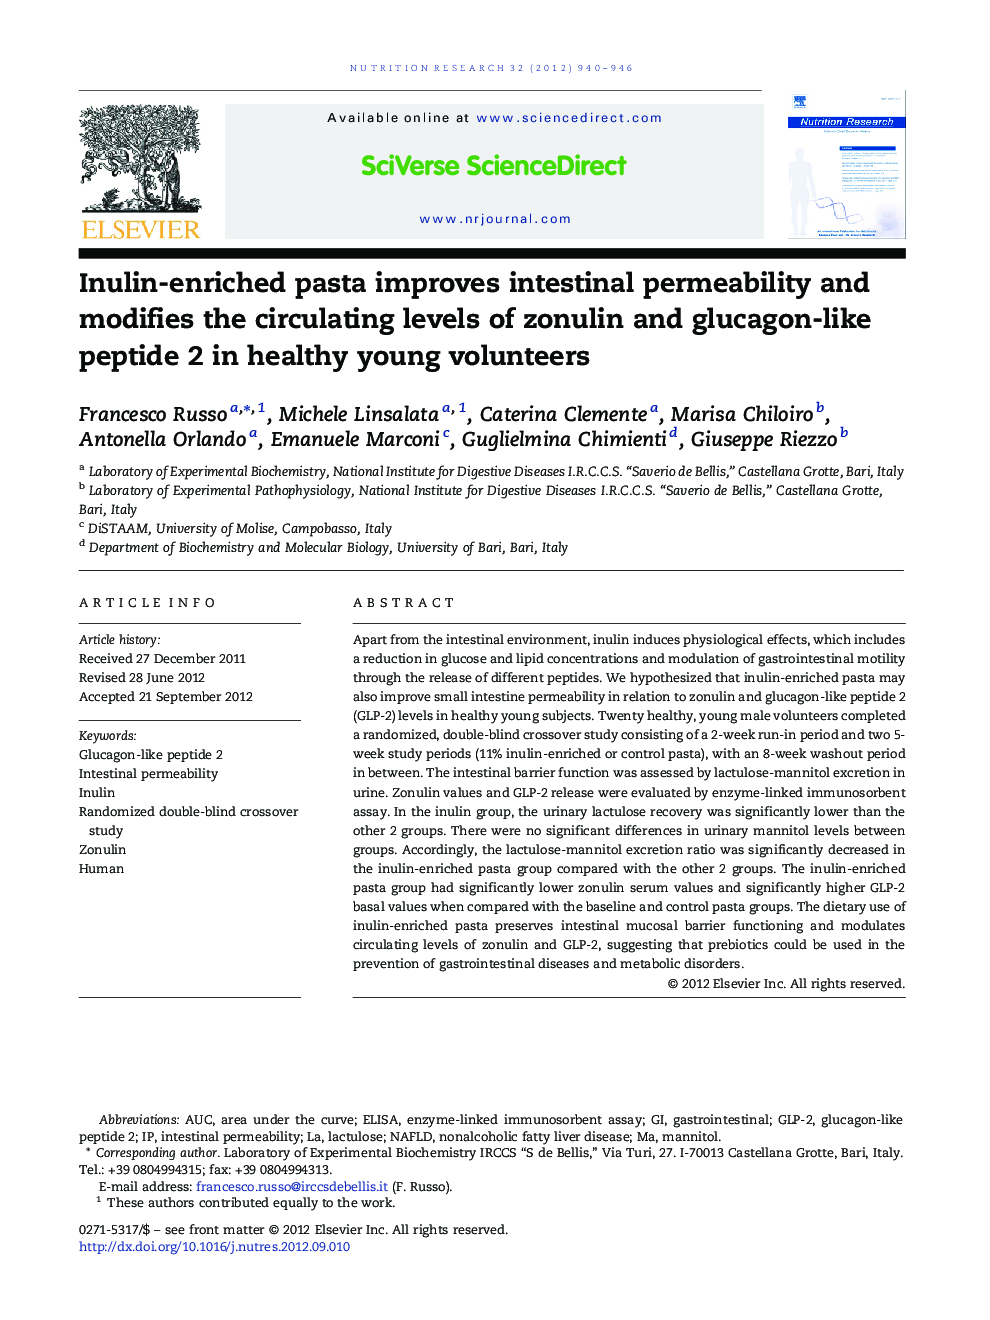 Inulin-enriched pasta improves intestinal permeability and modifies the circulating levels of zonulin and glucagon-like peptide 2 in healthy young volunteers